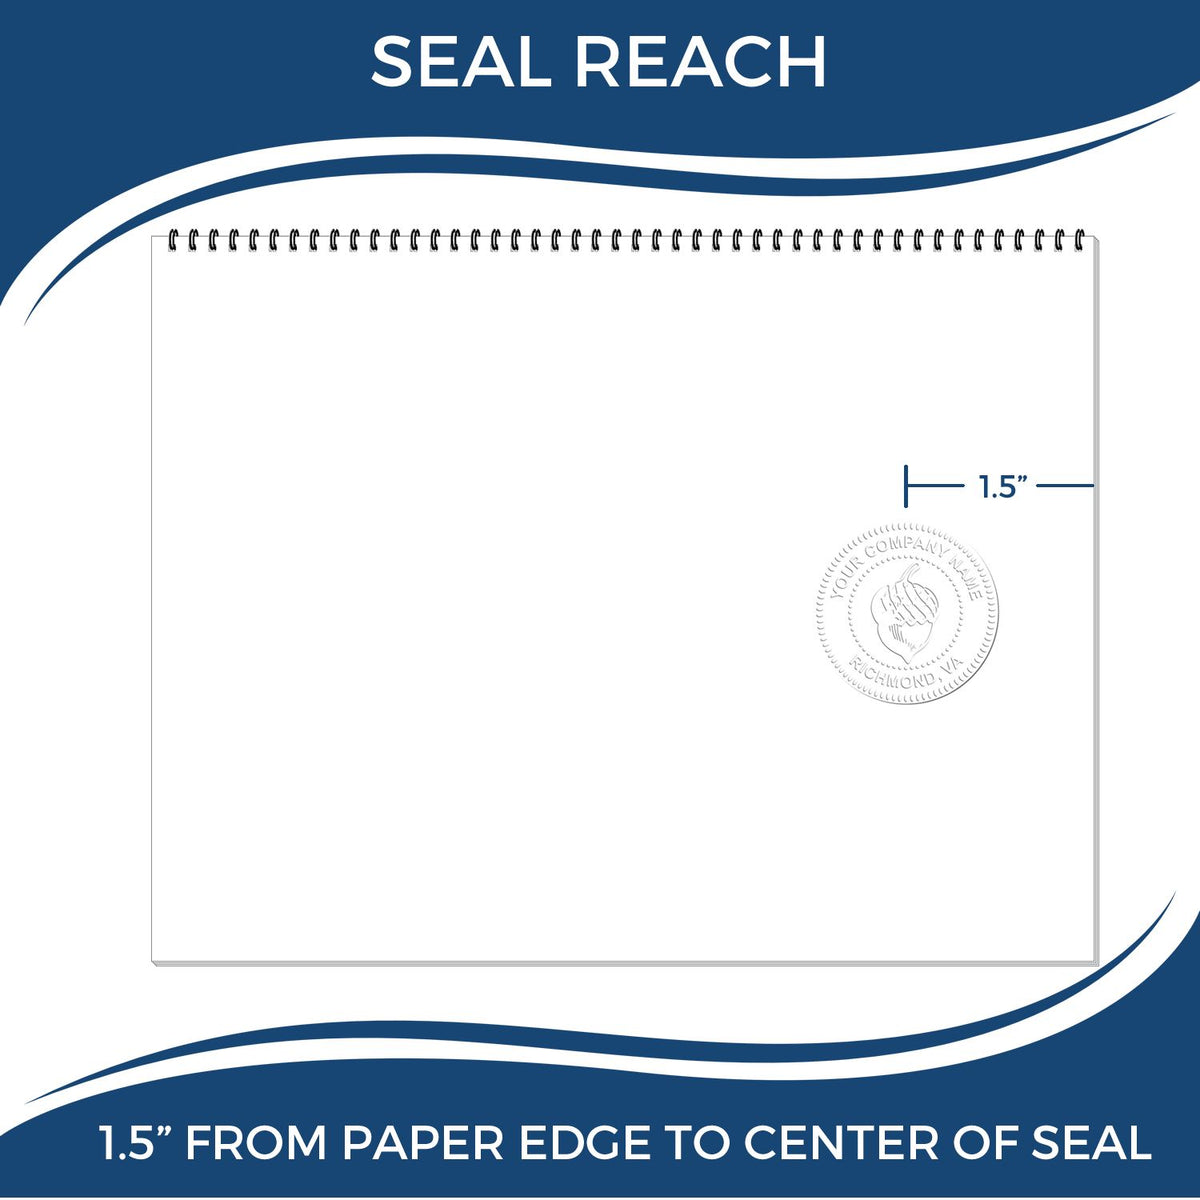 An infographic showing the seal reach which is represented by a ruler and a miniature seal image of the Gift New Jersey Landscape Architect Seal